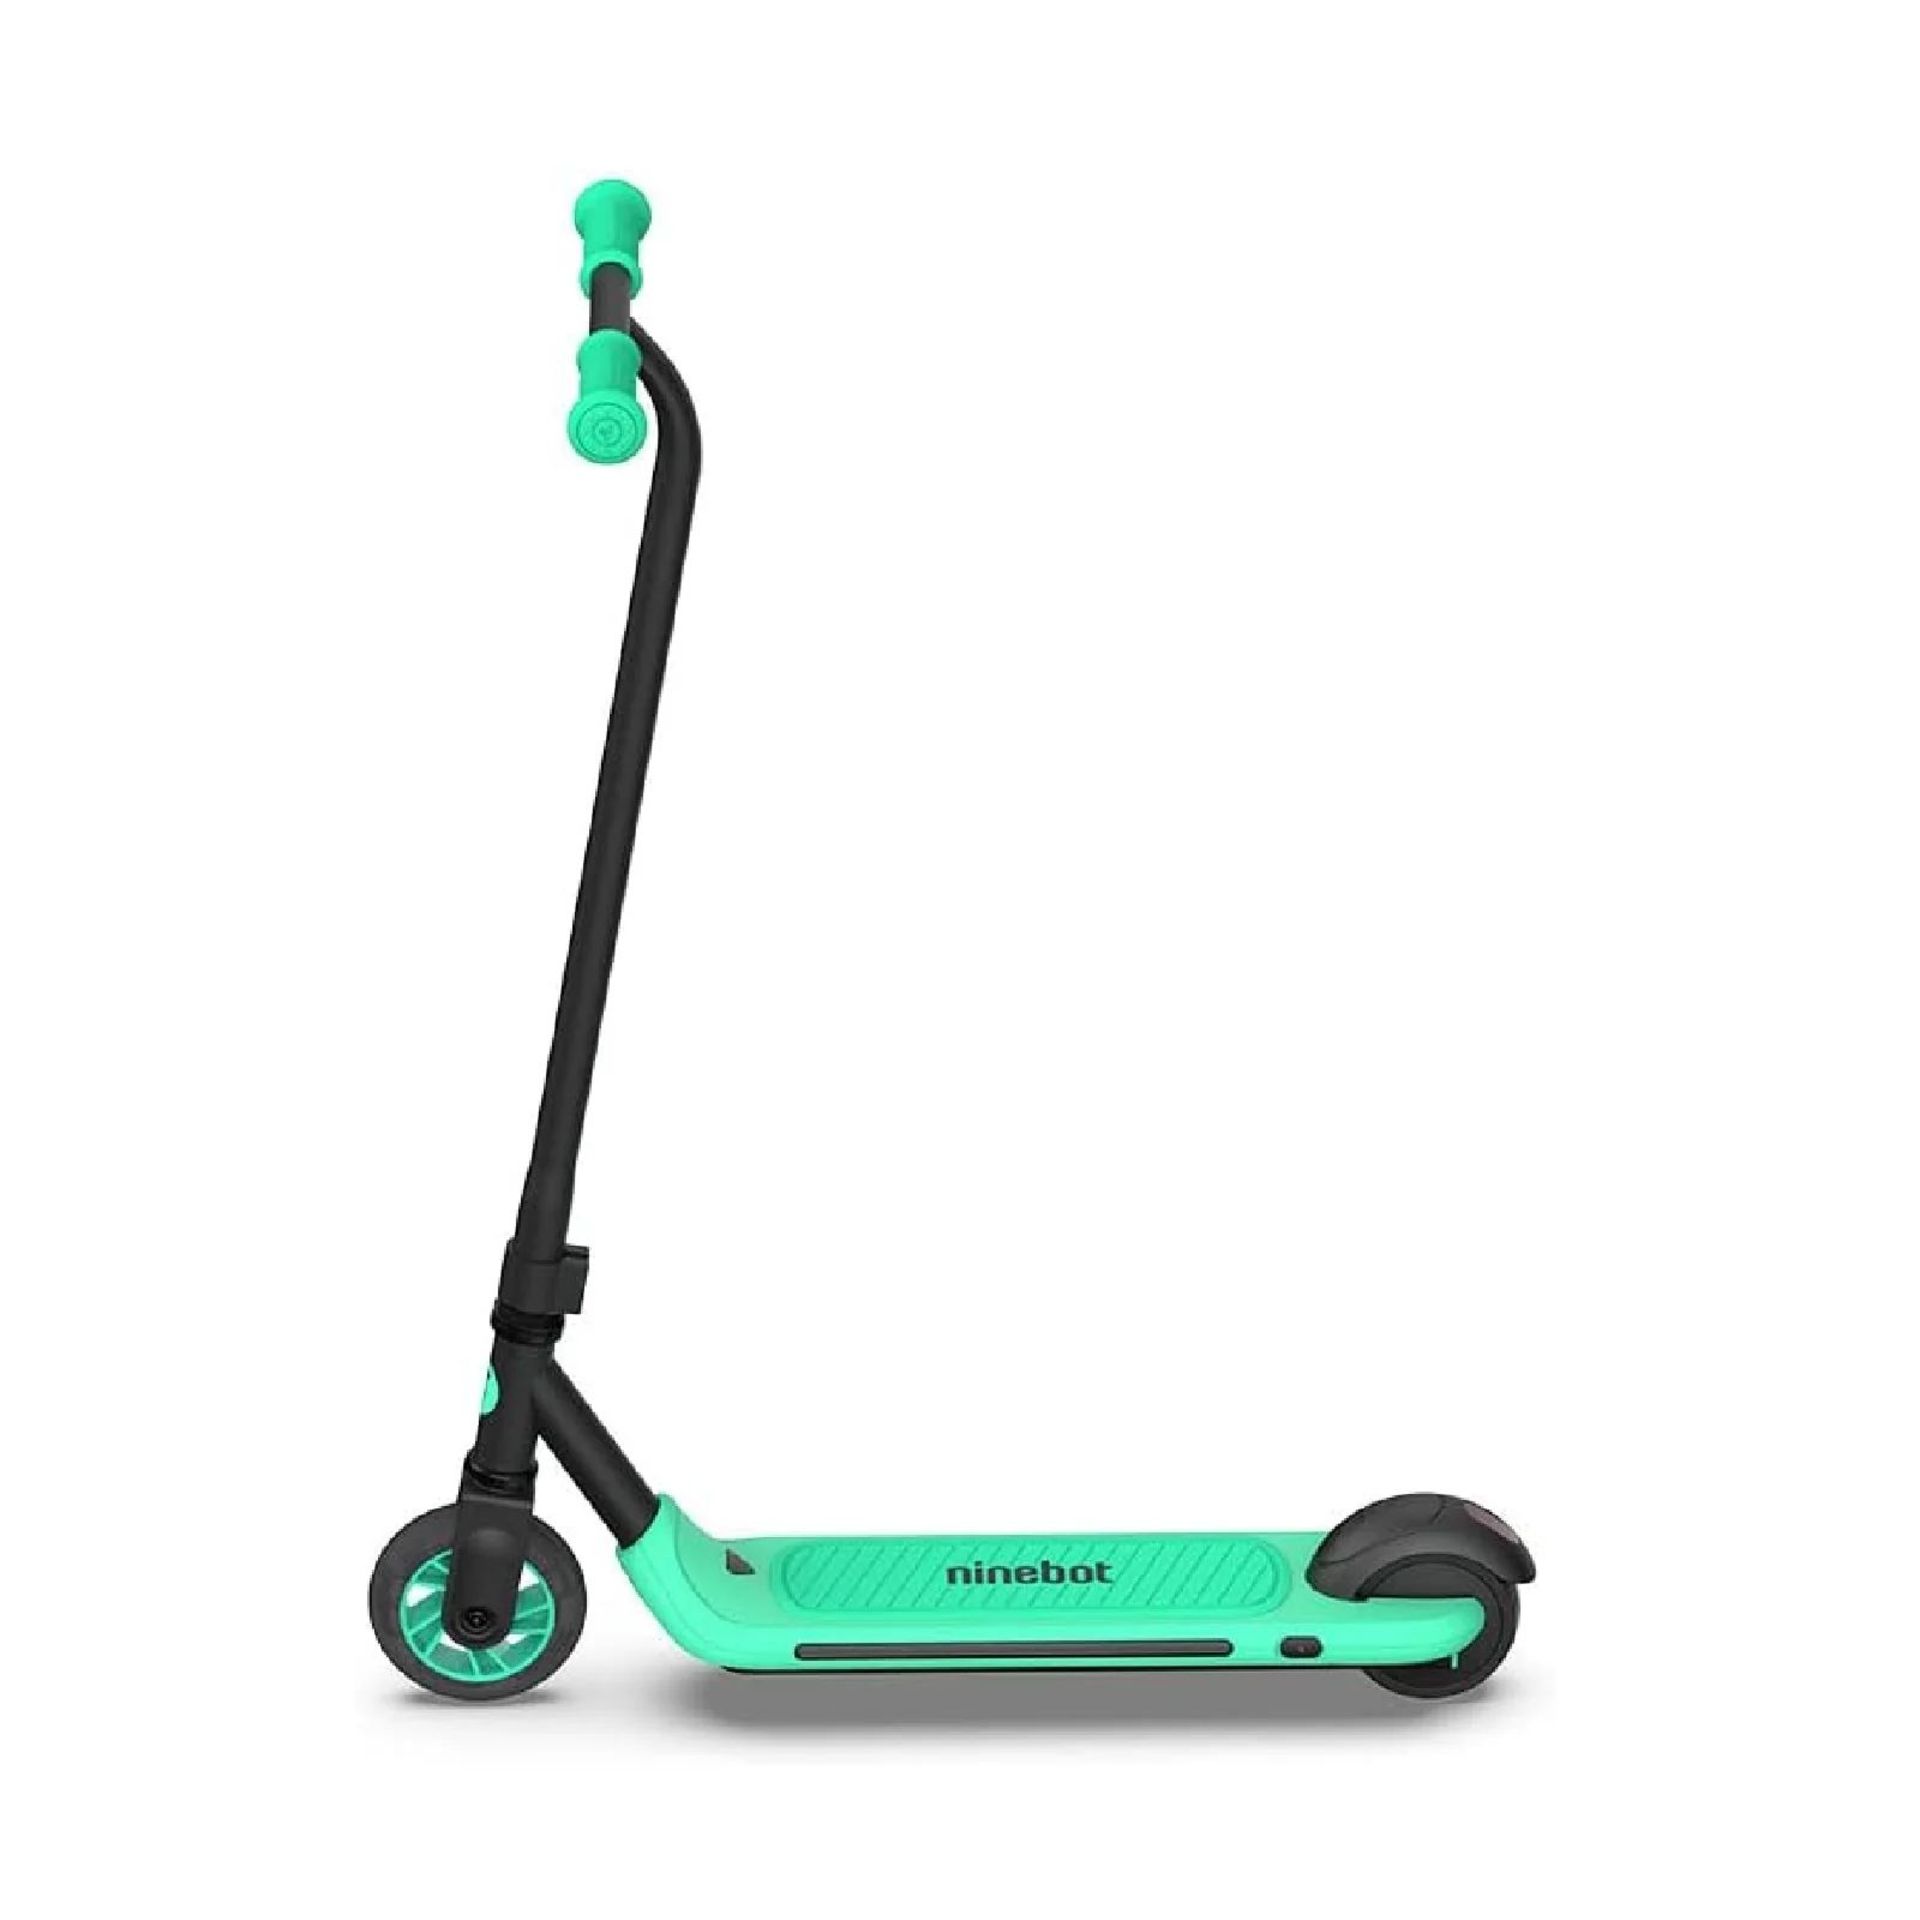 UNITS - SEGWAY NINEBOT ELECTRIC ASSIST E-KICK SCOOTER (FACTORY RECERTIFIED 30 DAY WARRANTY INCLUDED) - Bild 2 aus 3